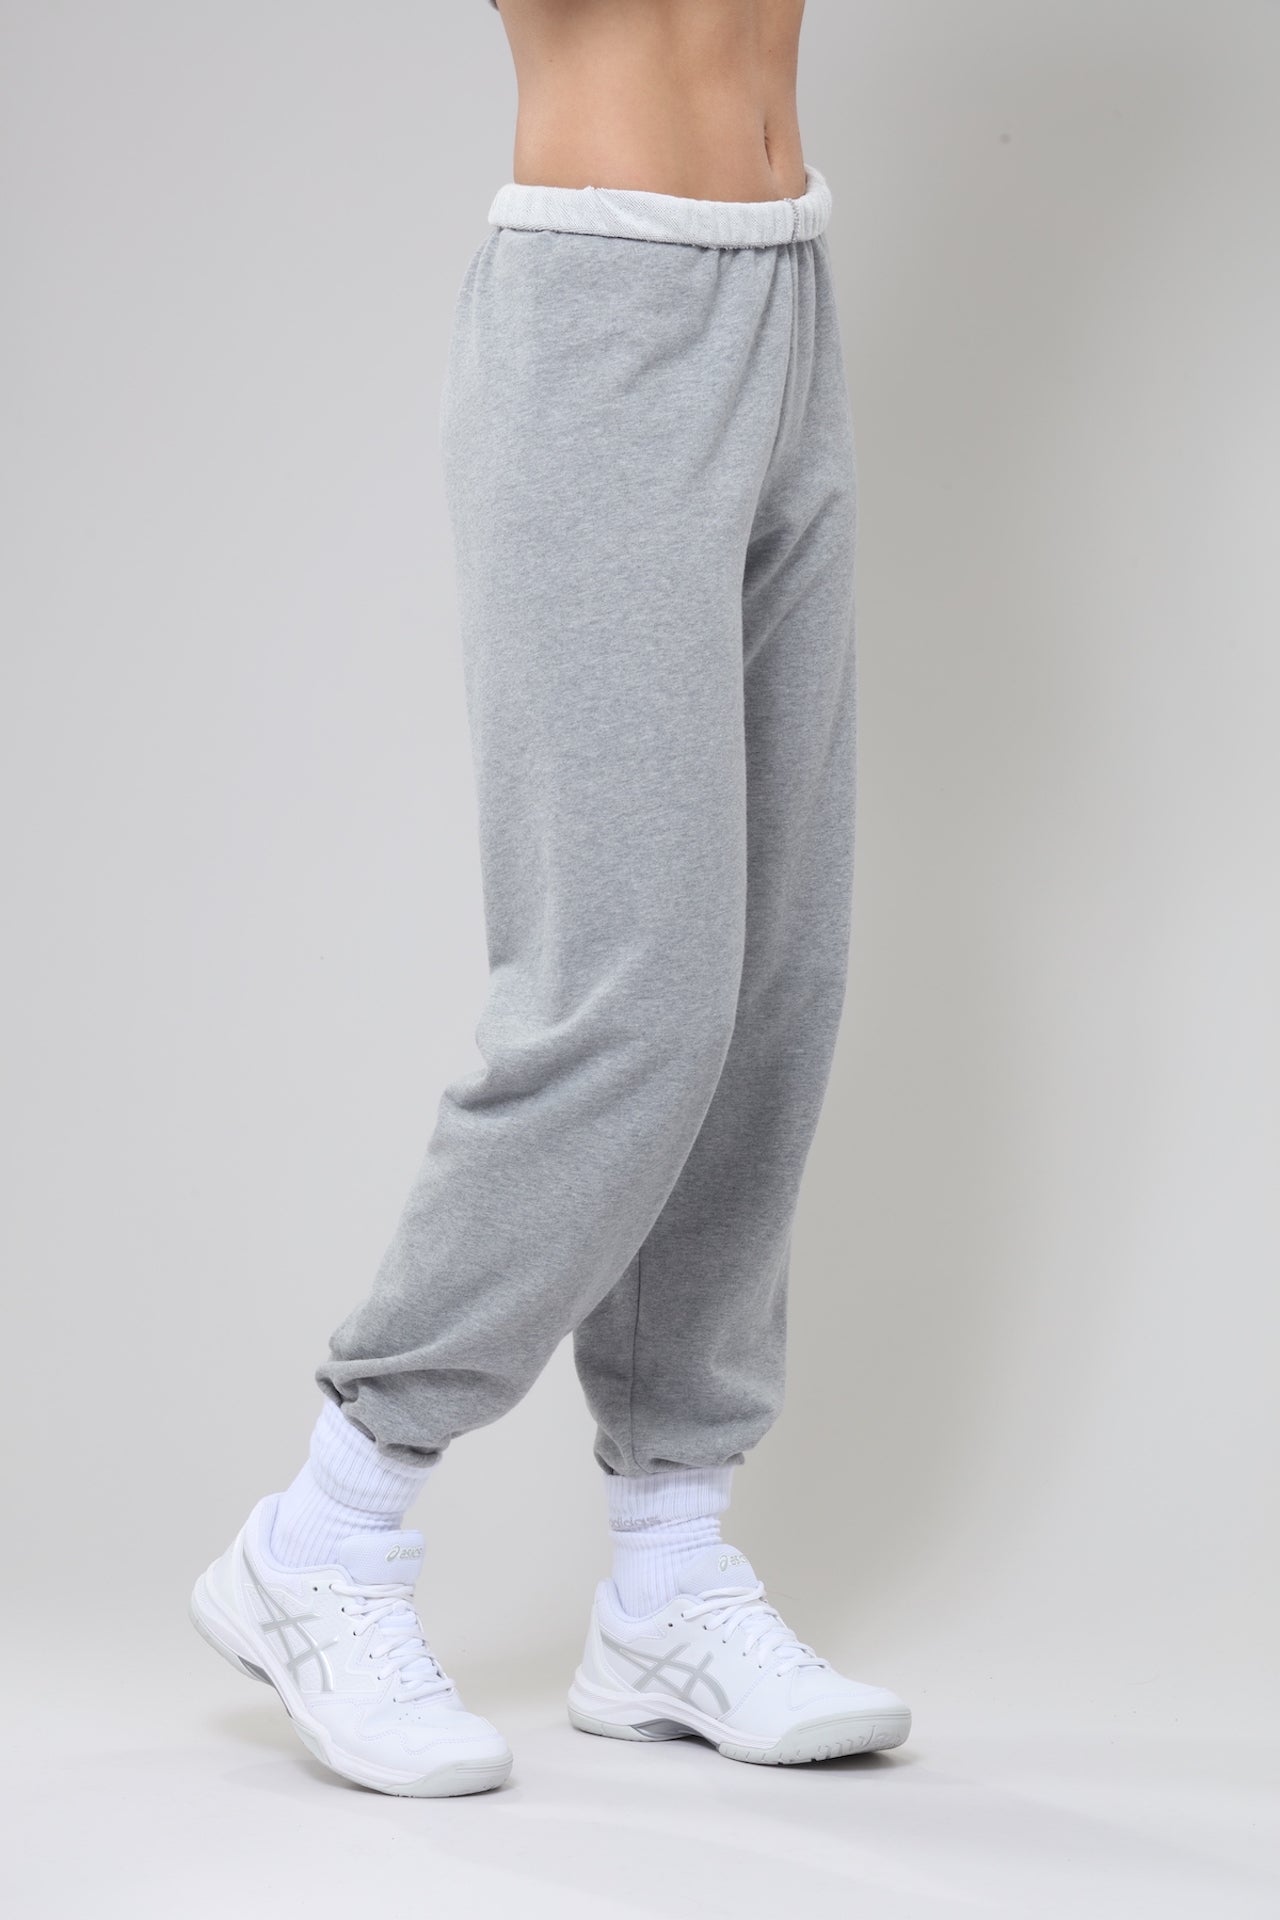 Chill Out Grey Jogger Pants